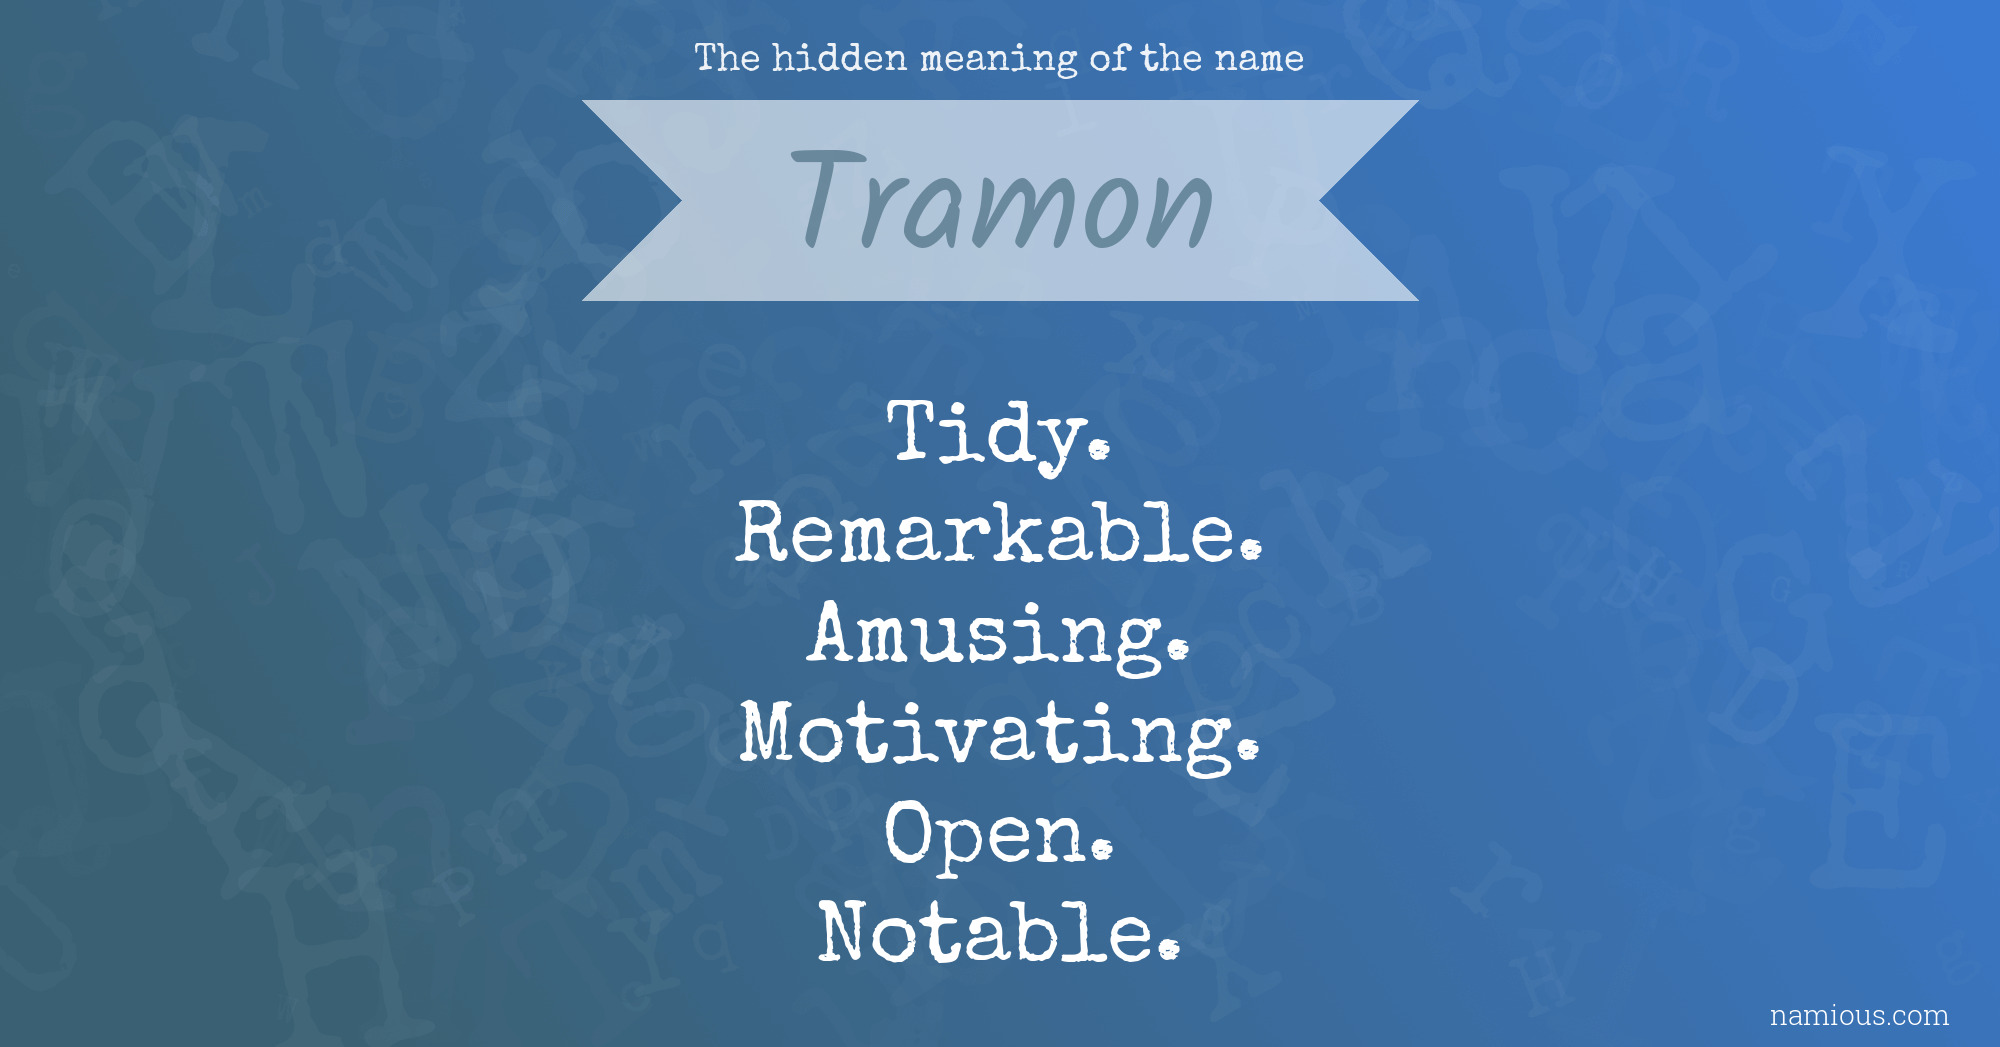 The hidden meaning of the name Tramon